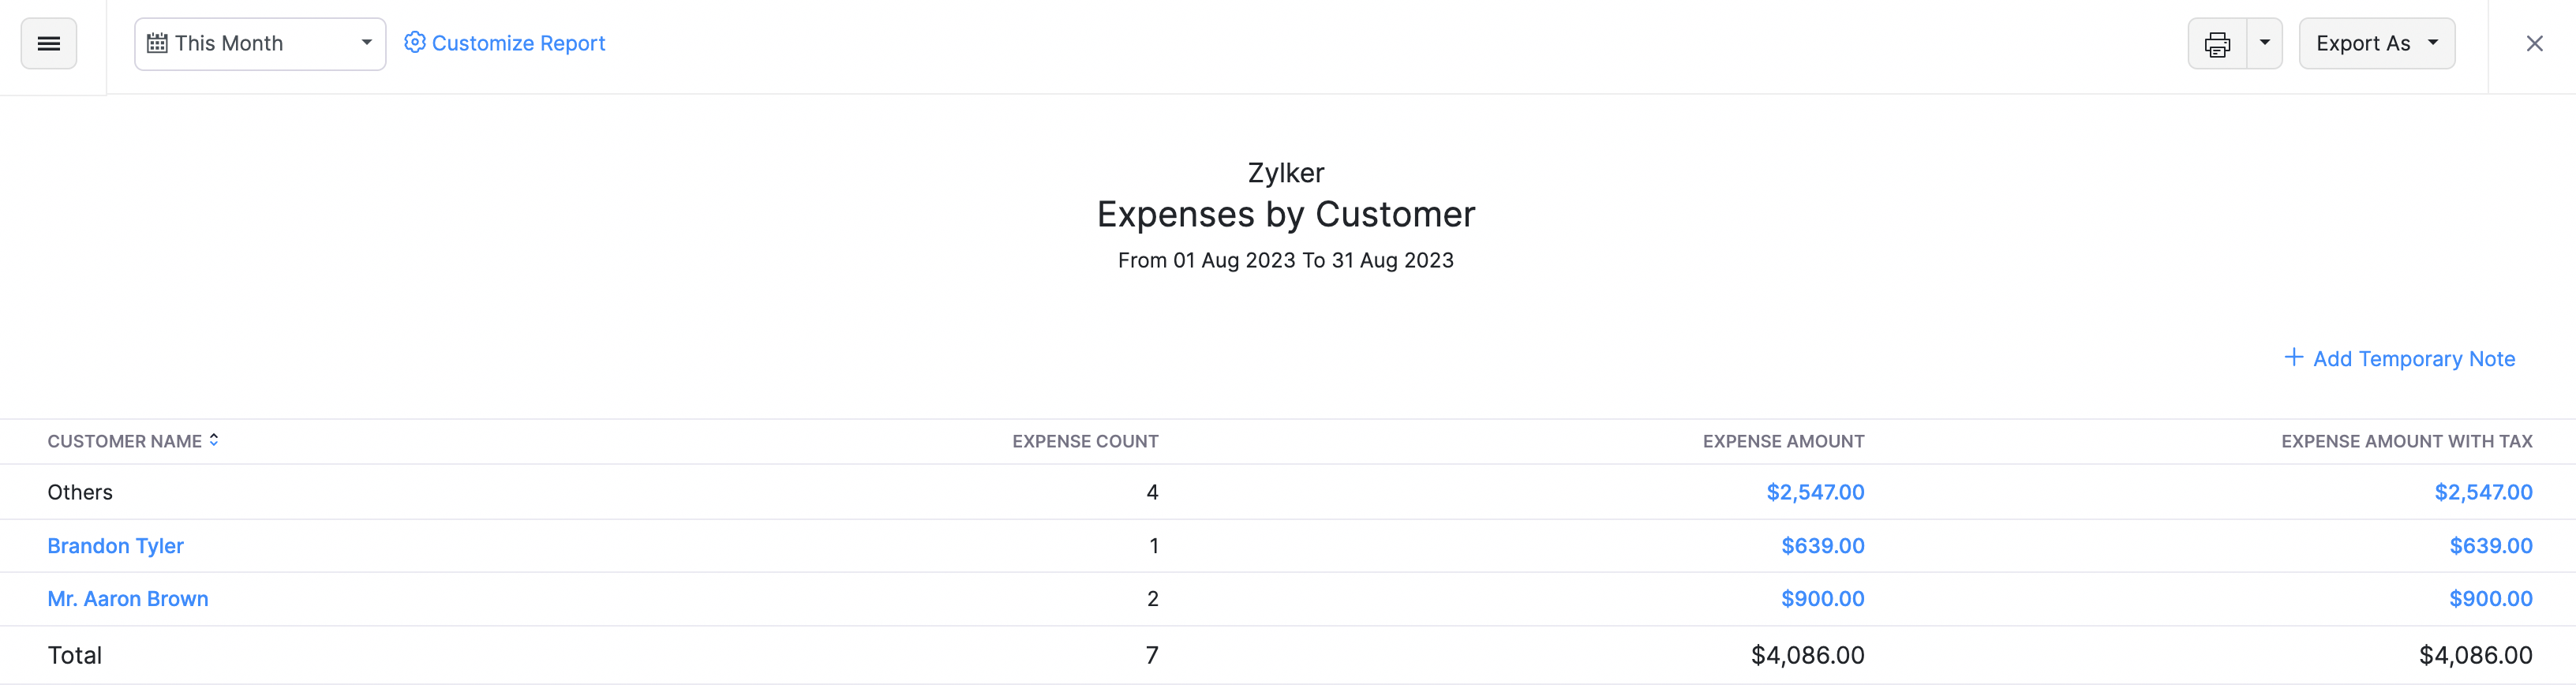 Expense by Customer Report